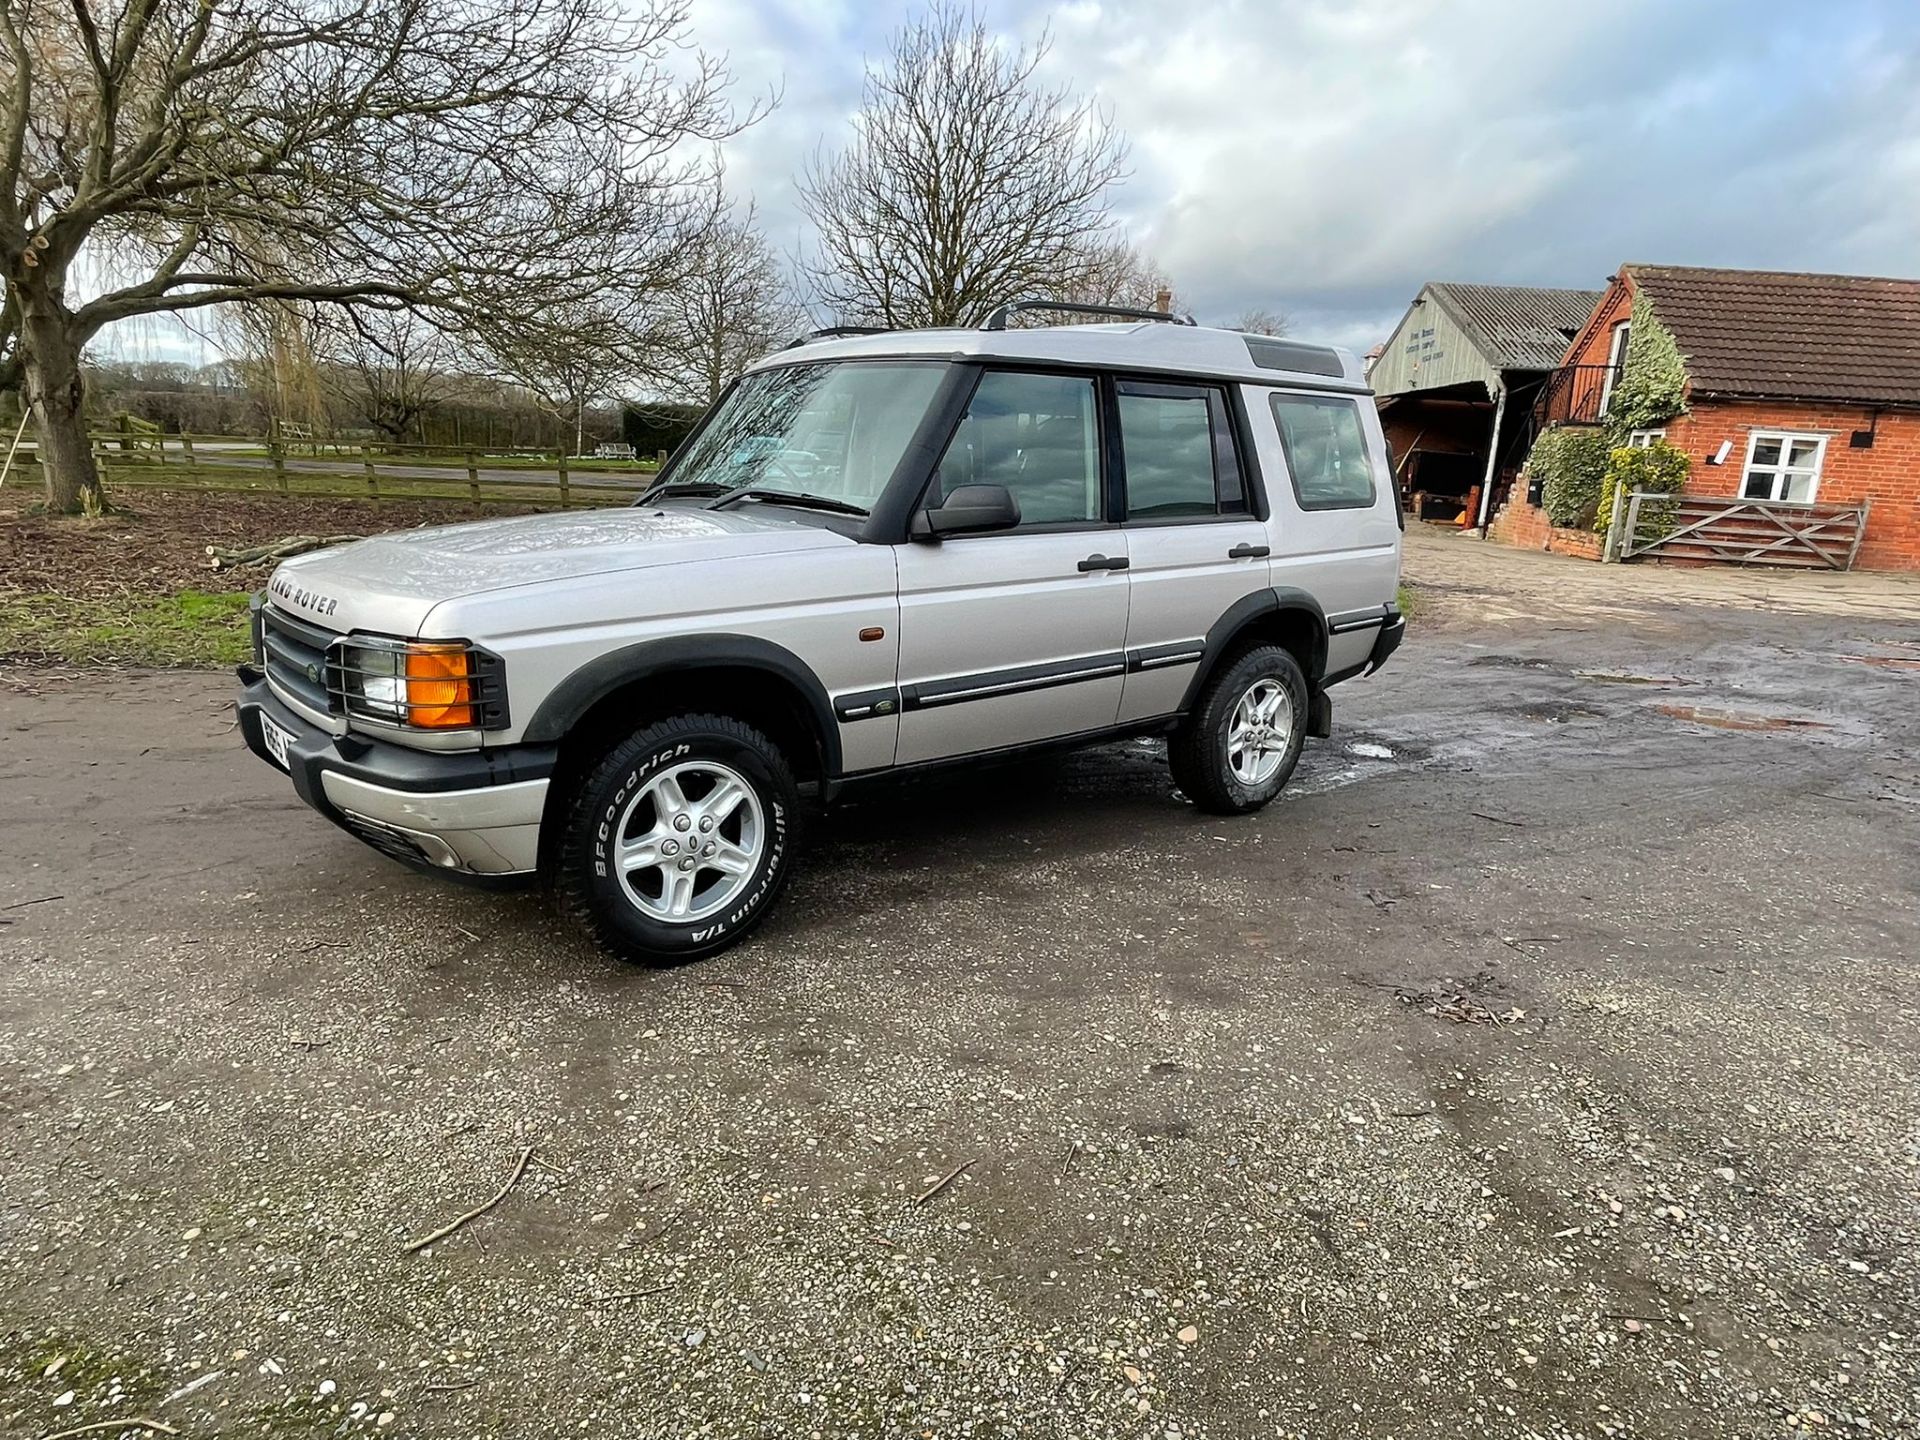 2000 LAND ROVER DISCOVERY TD5 ES SILVER ESTATE, 271,031 MILES, GALVANISED CHASSIS *NO VAT* - Image 3 of 17